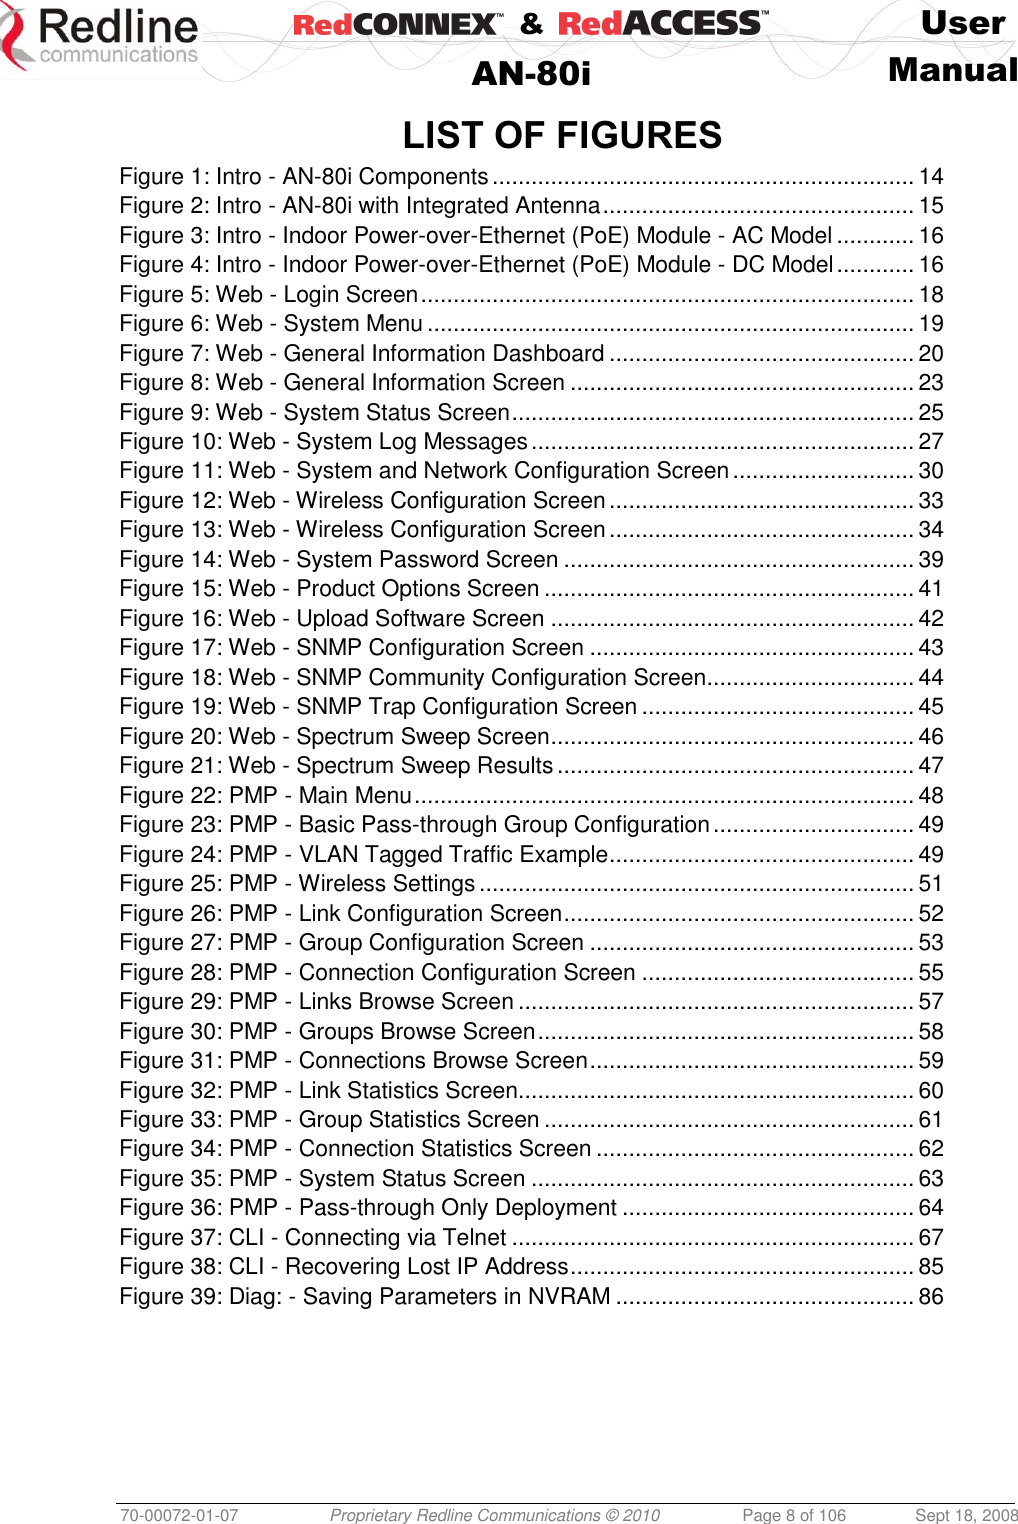    &amp;  User  AN-80i Manual  70-00072-01-07 Proprietary Redline Communications © 2010  Page 8 of 106  Sept 18, 2008  LIST OF FIGURES Figure 1: Intro - AN-80i Components ................................................................. 14 Figure 2: Intro - AN-80i with Integrated Antenna ................................................ 15 Figure 3: Intro - Indoor Power-over-Ethernet (PoE) Module - AC Model ............ 16 Figure 4: Intro - Indoor Power-over-Ethernet (PoE) Module - DC Model ............ 16 Figure 5: Web - Login Screen ............................................................................ 18 Figure 6: Web - System Menu ........................................................................... 19 Figure 7: Web - General Information Dashboard ............................................... 20 Figure 8: Web - General Information Screen ..................................................... 23 Figure 9: Web - System Status Screen .............................................................. 25 Figure 10: Web - System Log Messages ........................................................... 27 Figure 11: Web - System and Network Configuration Screen ............................ 30 Figure 12: Web - Wireless Configuration Screen ............................................... 33 Figure 13: Web - Wireless Configuration Screen ............................................... 34 Figure 14: Web - System Password Screen ...................................................... 39 Figure 15: Web - Product Options Screen ......................................................... 41 Figure 16: Web - Upload Software Screen ........................................................ 42 Figure 17: Web - SNMP Configuration Screen .................................................. 43 Figure 18: Web - SNMP Community Configuration Screen ................................ 44 Figure 19: Web - SNMP Trap Configuration Screen .......................................... 45 Figure 20: Web - Spectrum Sweep Screen ........................................................ 46 Figure 21: Web - Spectrum Sweep Results ....................................................... 47 Figure 22: PMP - Main Menu ............................................................................. 48 Figure 23: PMP - Basic Pass-through Group Configuration ............................... 49 Figure 24: PMP - VLAN Tagged Traffic Example ............................................... 49 Figure 25: PMP - Wireless Settings ................................................................... 51 Figure 26: PMP - Link Configuration Screen ...................................................... 52 Figure 27: PMP - Group Configuration Screen .................................................. 53 Figure 28: PMP - Connection Configuration Screen .......................................... 55 Figure 29: PMP - Links Browse Screen ............................................................. 57 Figure 30: PMP - Groups Browse Screen .......................................................... 58 Figure 31: PMP - Connections Browse Screen .................................................. 59 Figure 32: PMP - Link Statistics Screen ............................................................. 60 Figure 33: PMP - Group Statistics Screen ......................................................... 61 Figure 34: PMP - Connection Statistics Screen ................................................. 62 Figure 35: PMP - System Status Screen ........................................................... 63 Figure 36: PMP - Pass-through Only Deployment ............................................. 64 Figure 37: CLI - Connecting via Telnet .............................................................. 67 Figure 38: CLI - Recovering Lost IP Address ..................................................... 85 Figure 39: Diag: - Saving Parameters in NVRAM .............................................. 86    